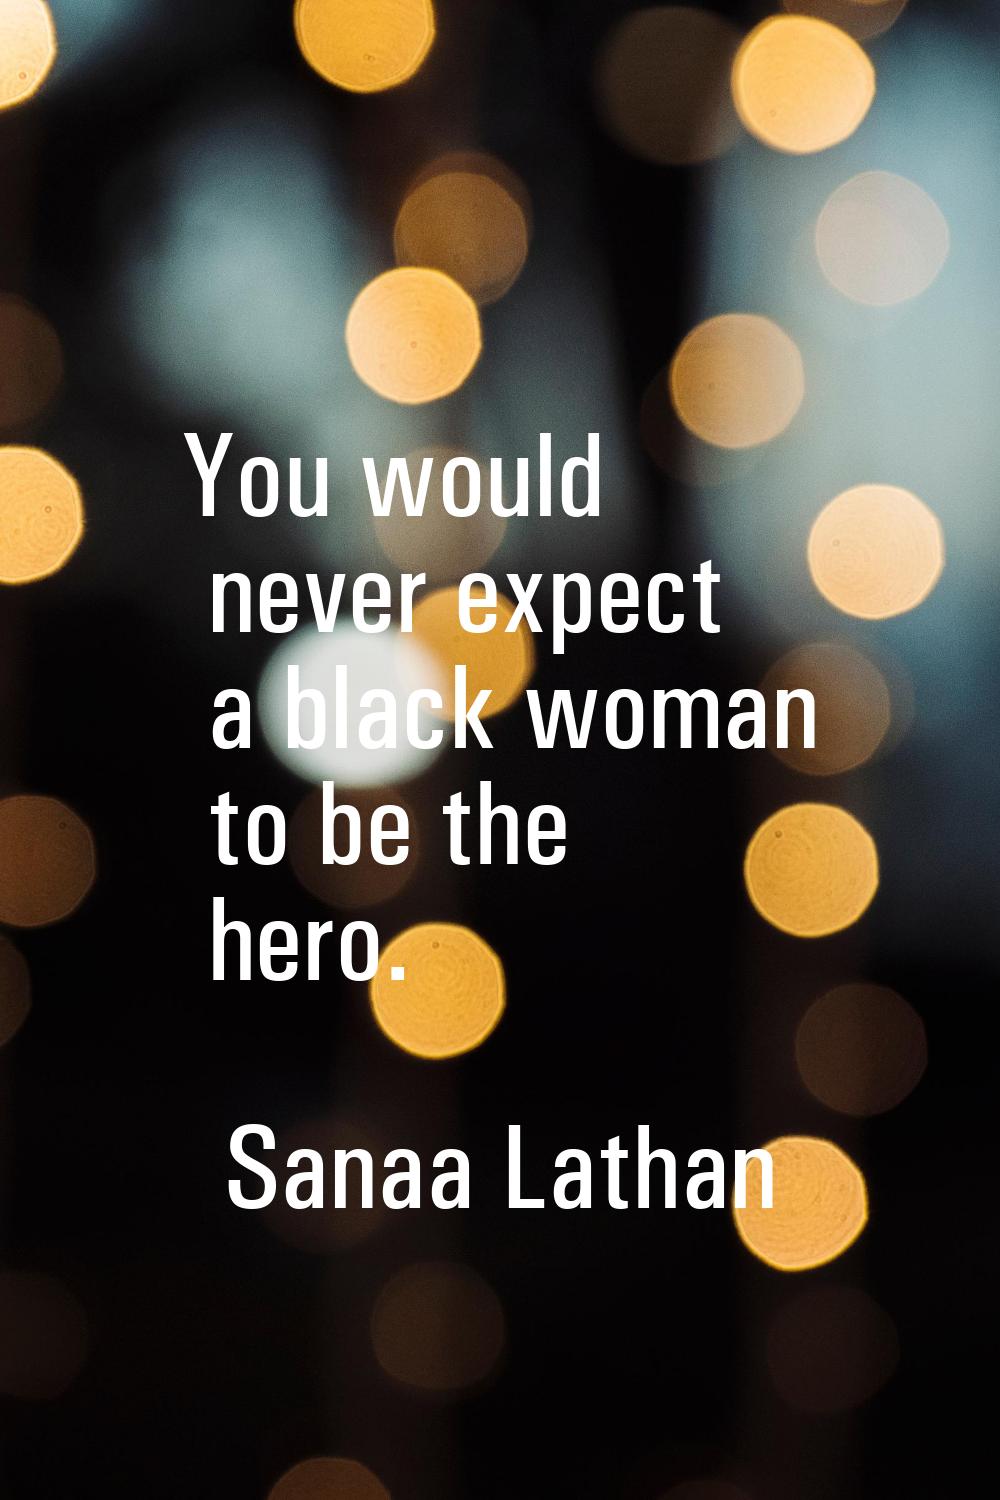 You would never expect a black woman to be the hero.